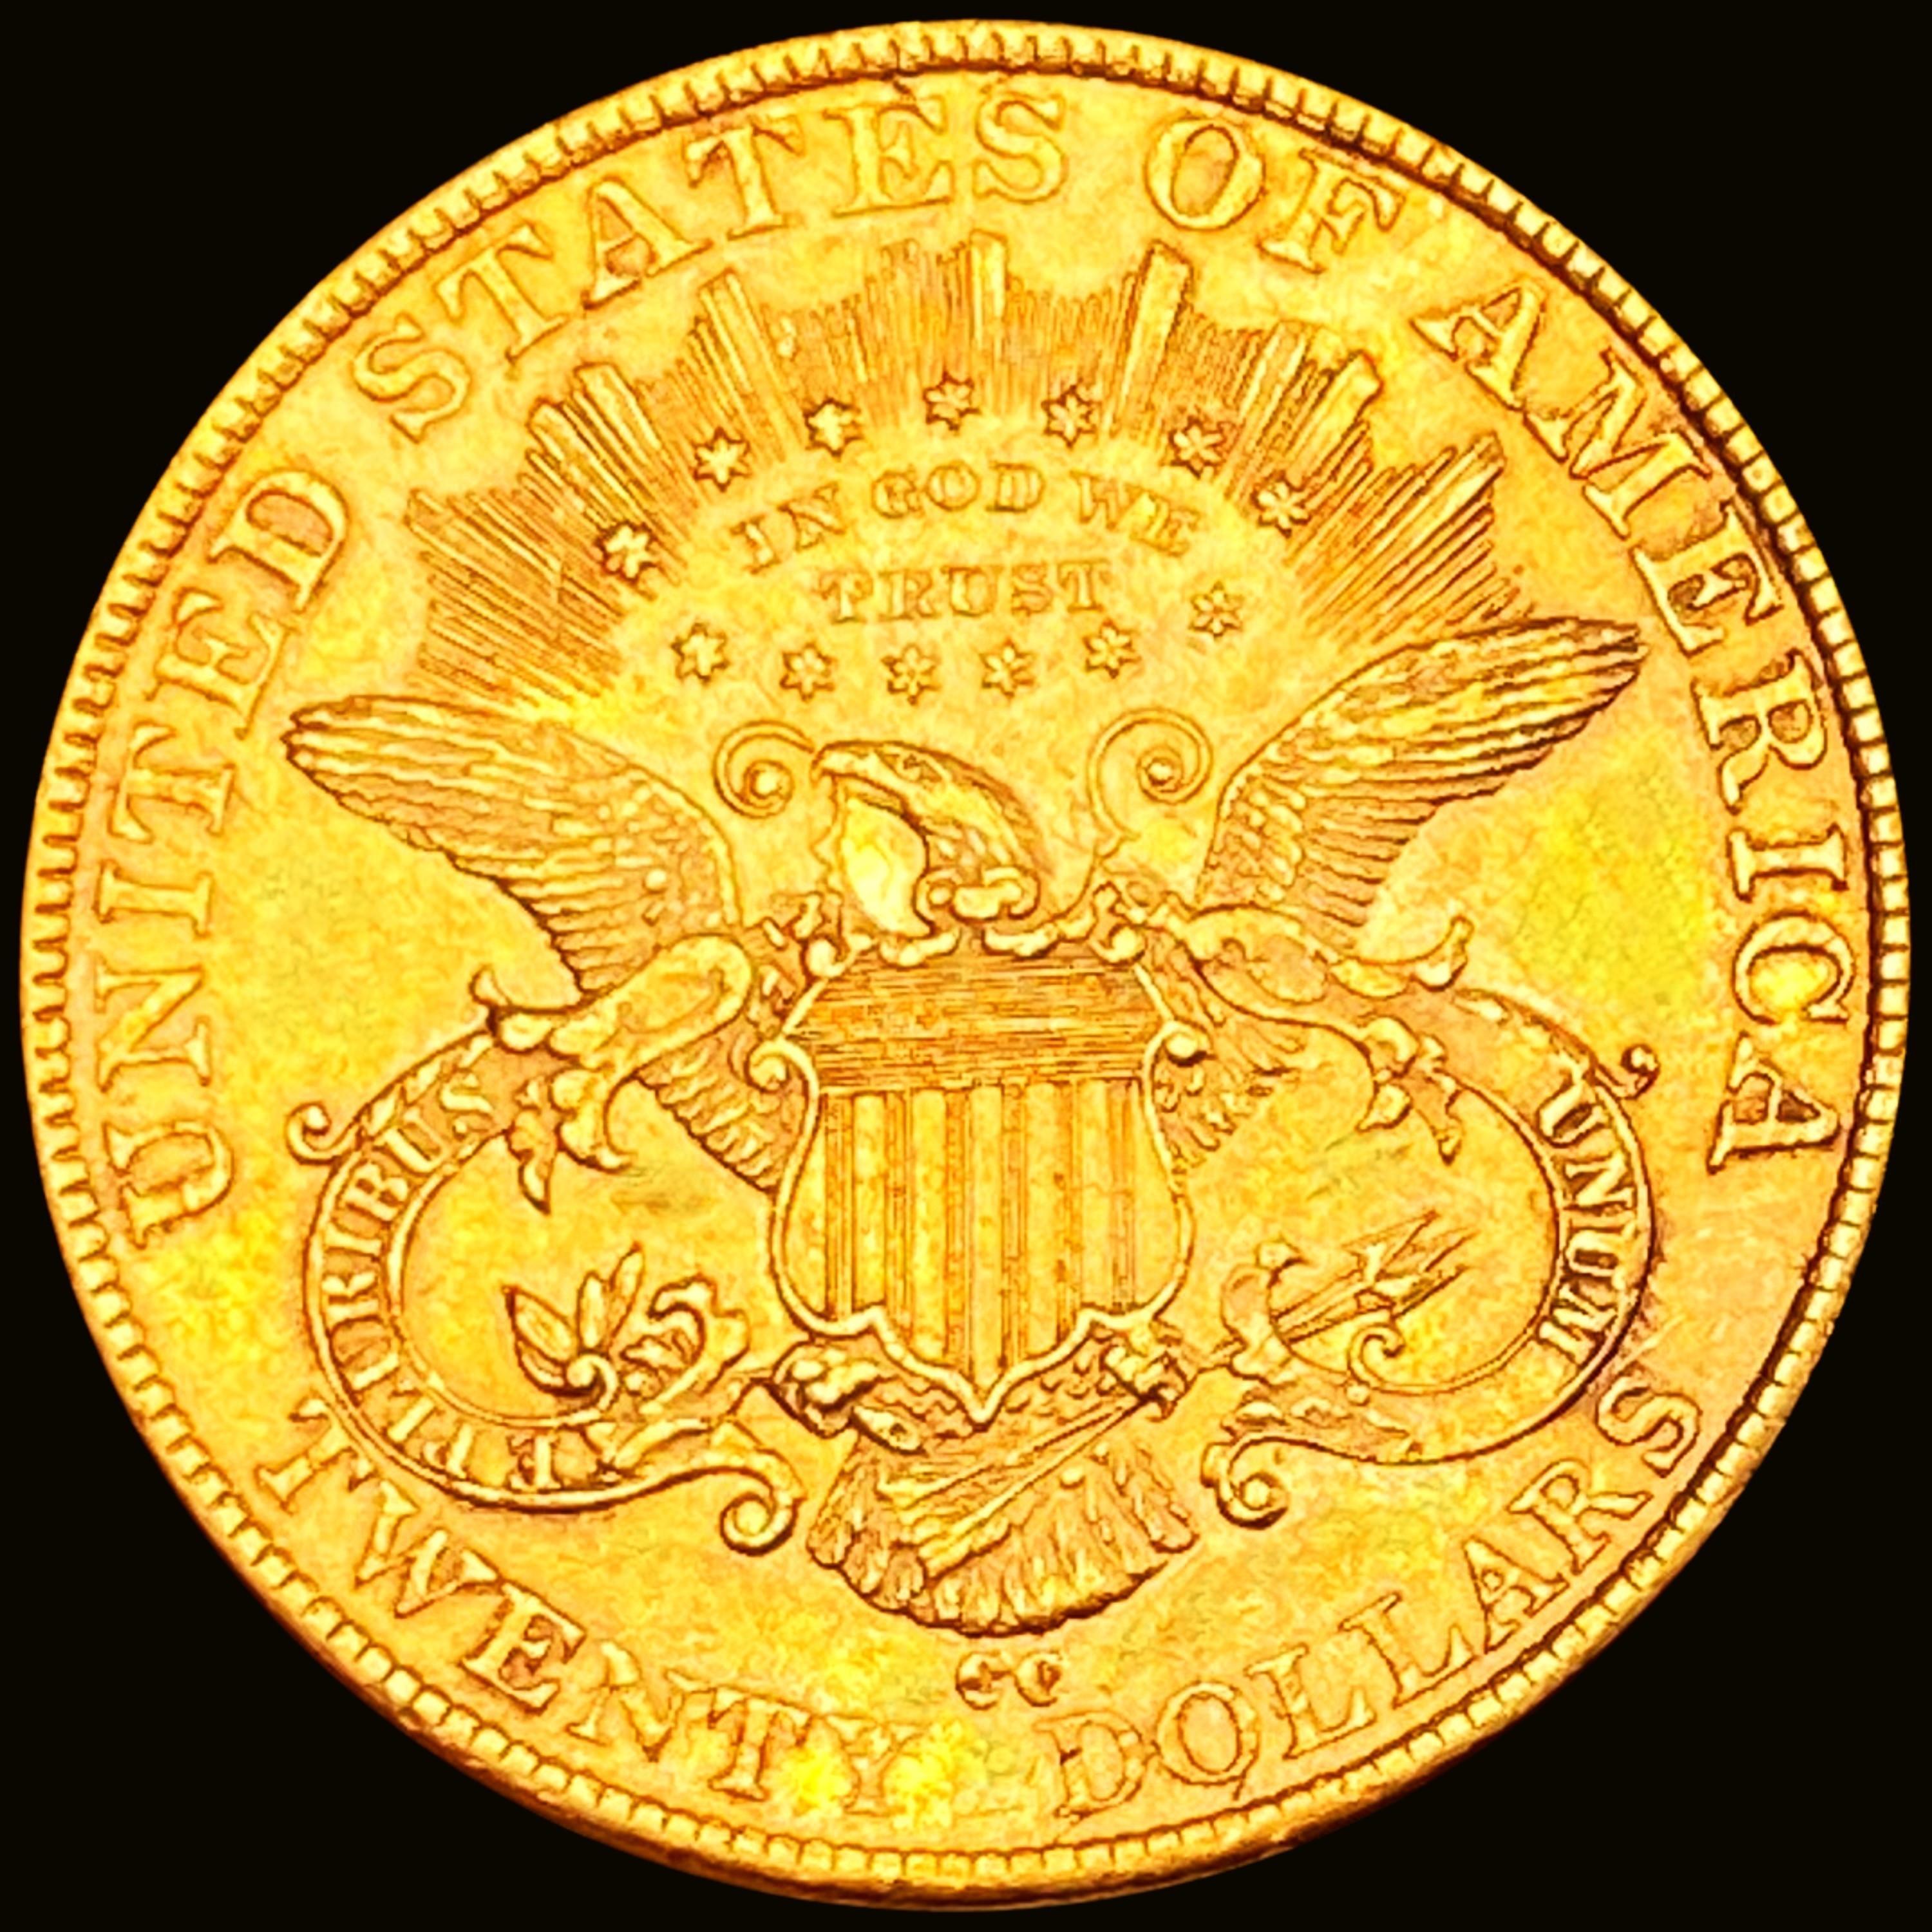 1892-CC $20 Gold Double Eagle UNCIRCULATED +